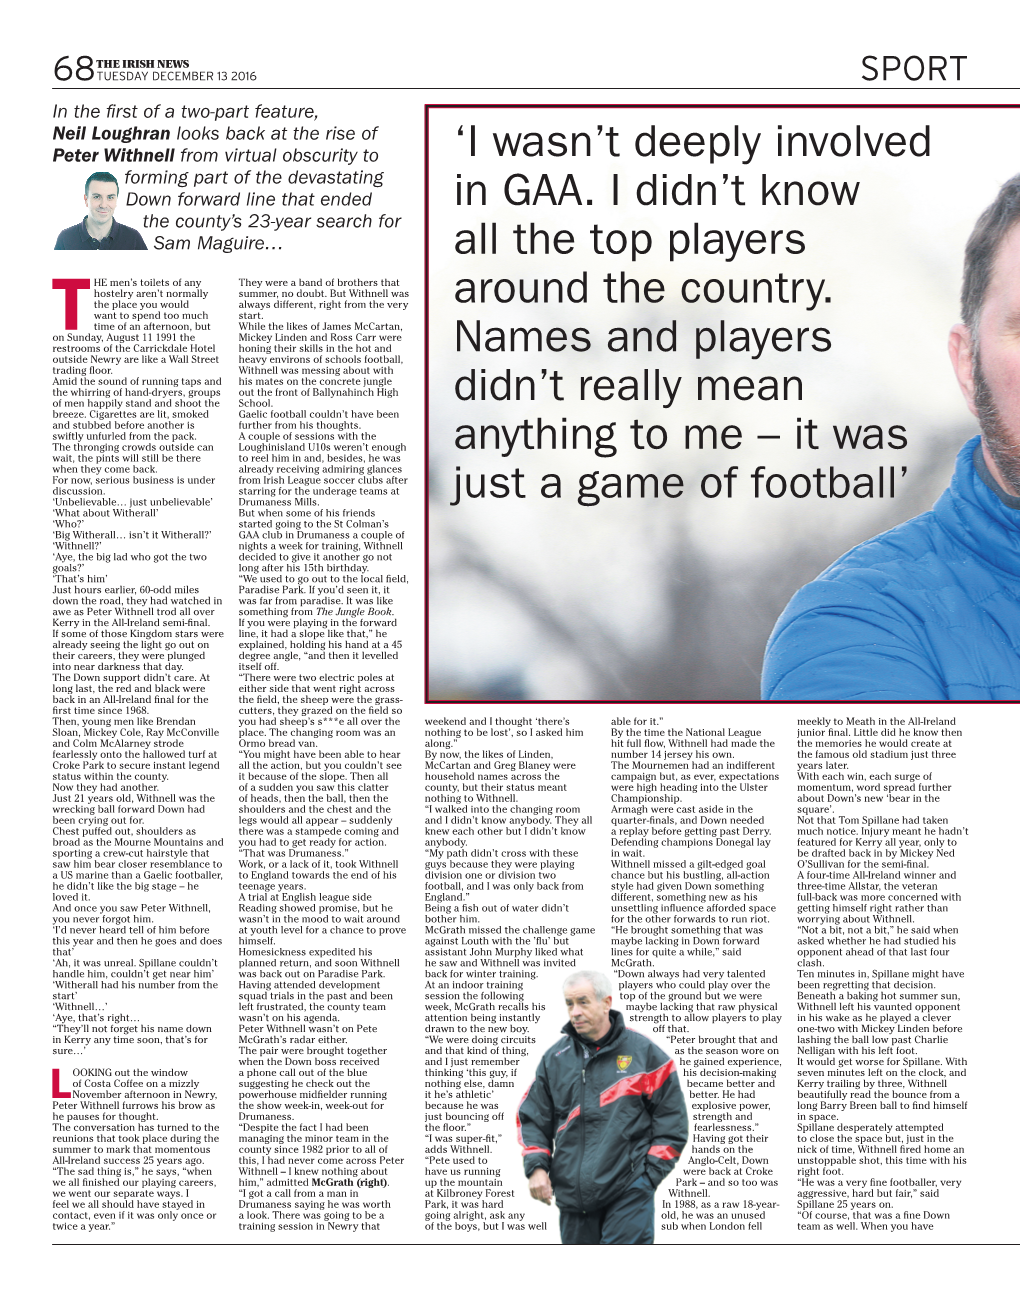 Peter Withnell from Virtual Obscurity to ‘I Wasn’T Deeply Involved Forming Part of the Devastating Down Forward Line That Ended in GAA